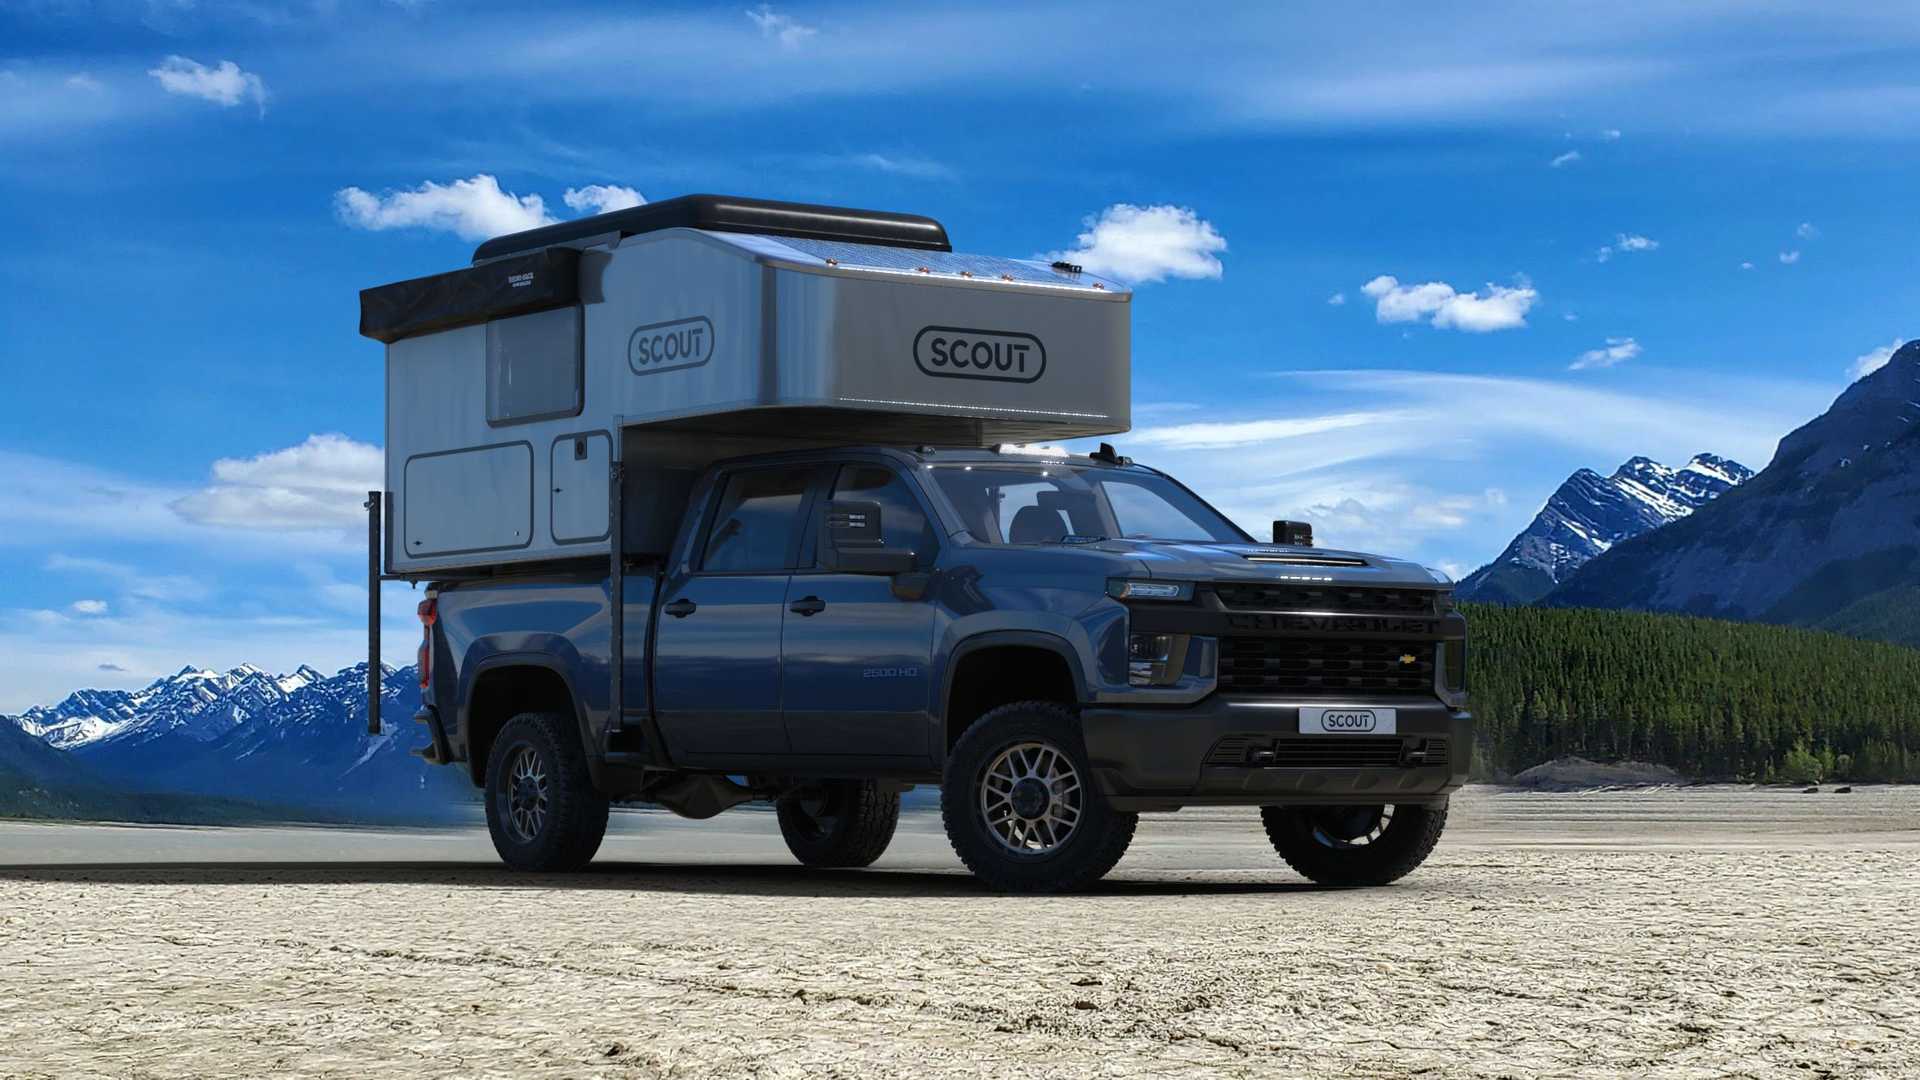 scout-campers-kenai-truck-topper-exterior-on-truck.jpg